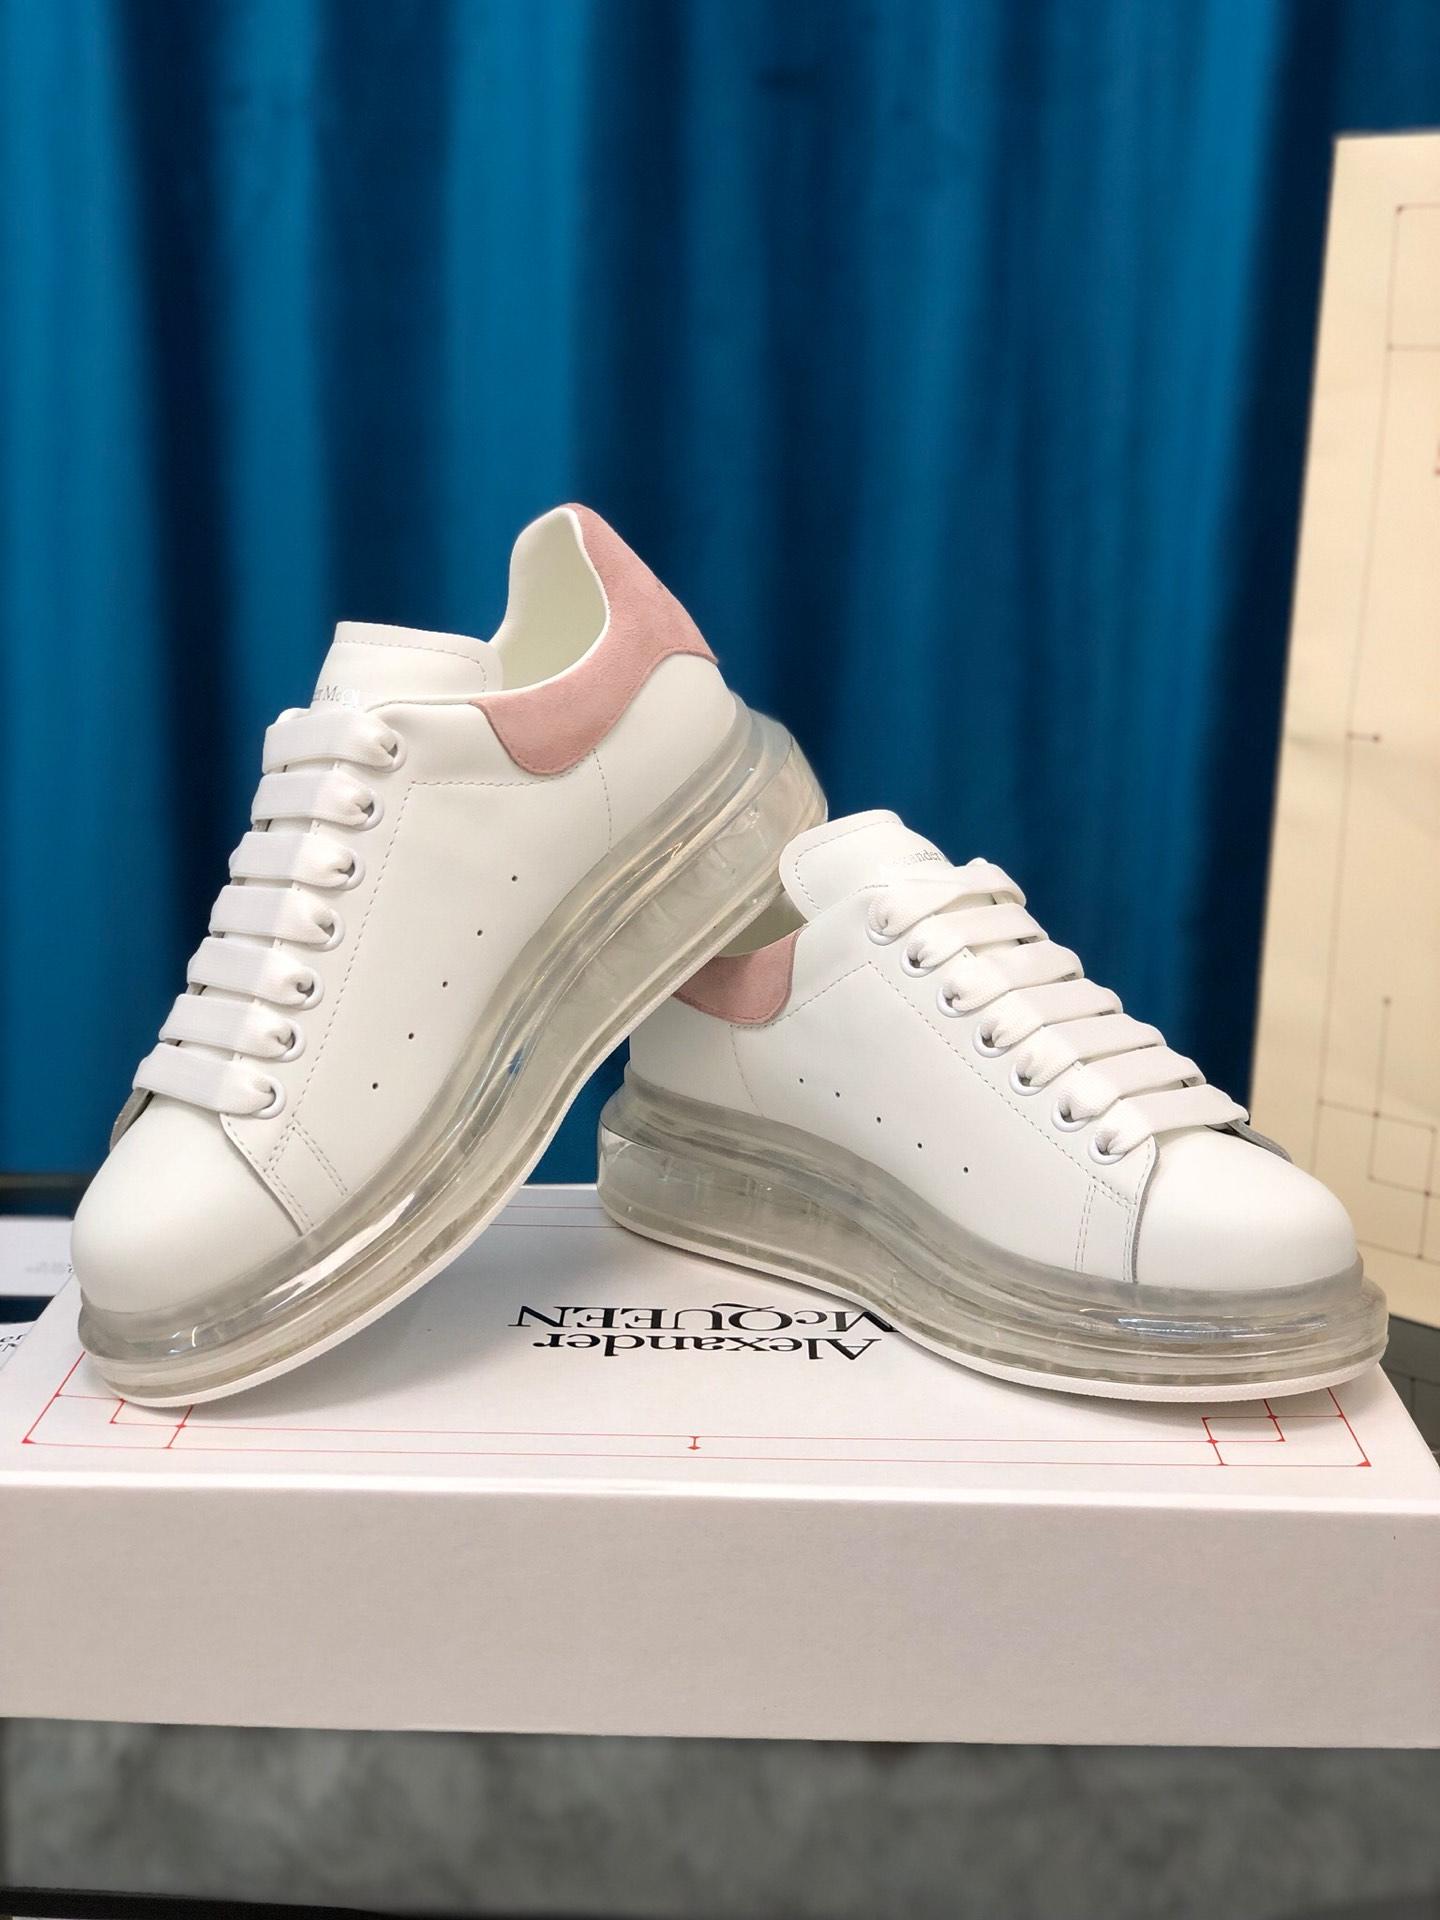 Alexander McQueen Fahion Sneaker White and pink suede heel with transparent sole MS100029